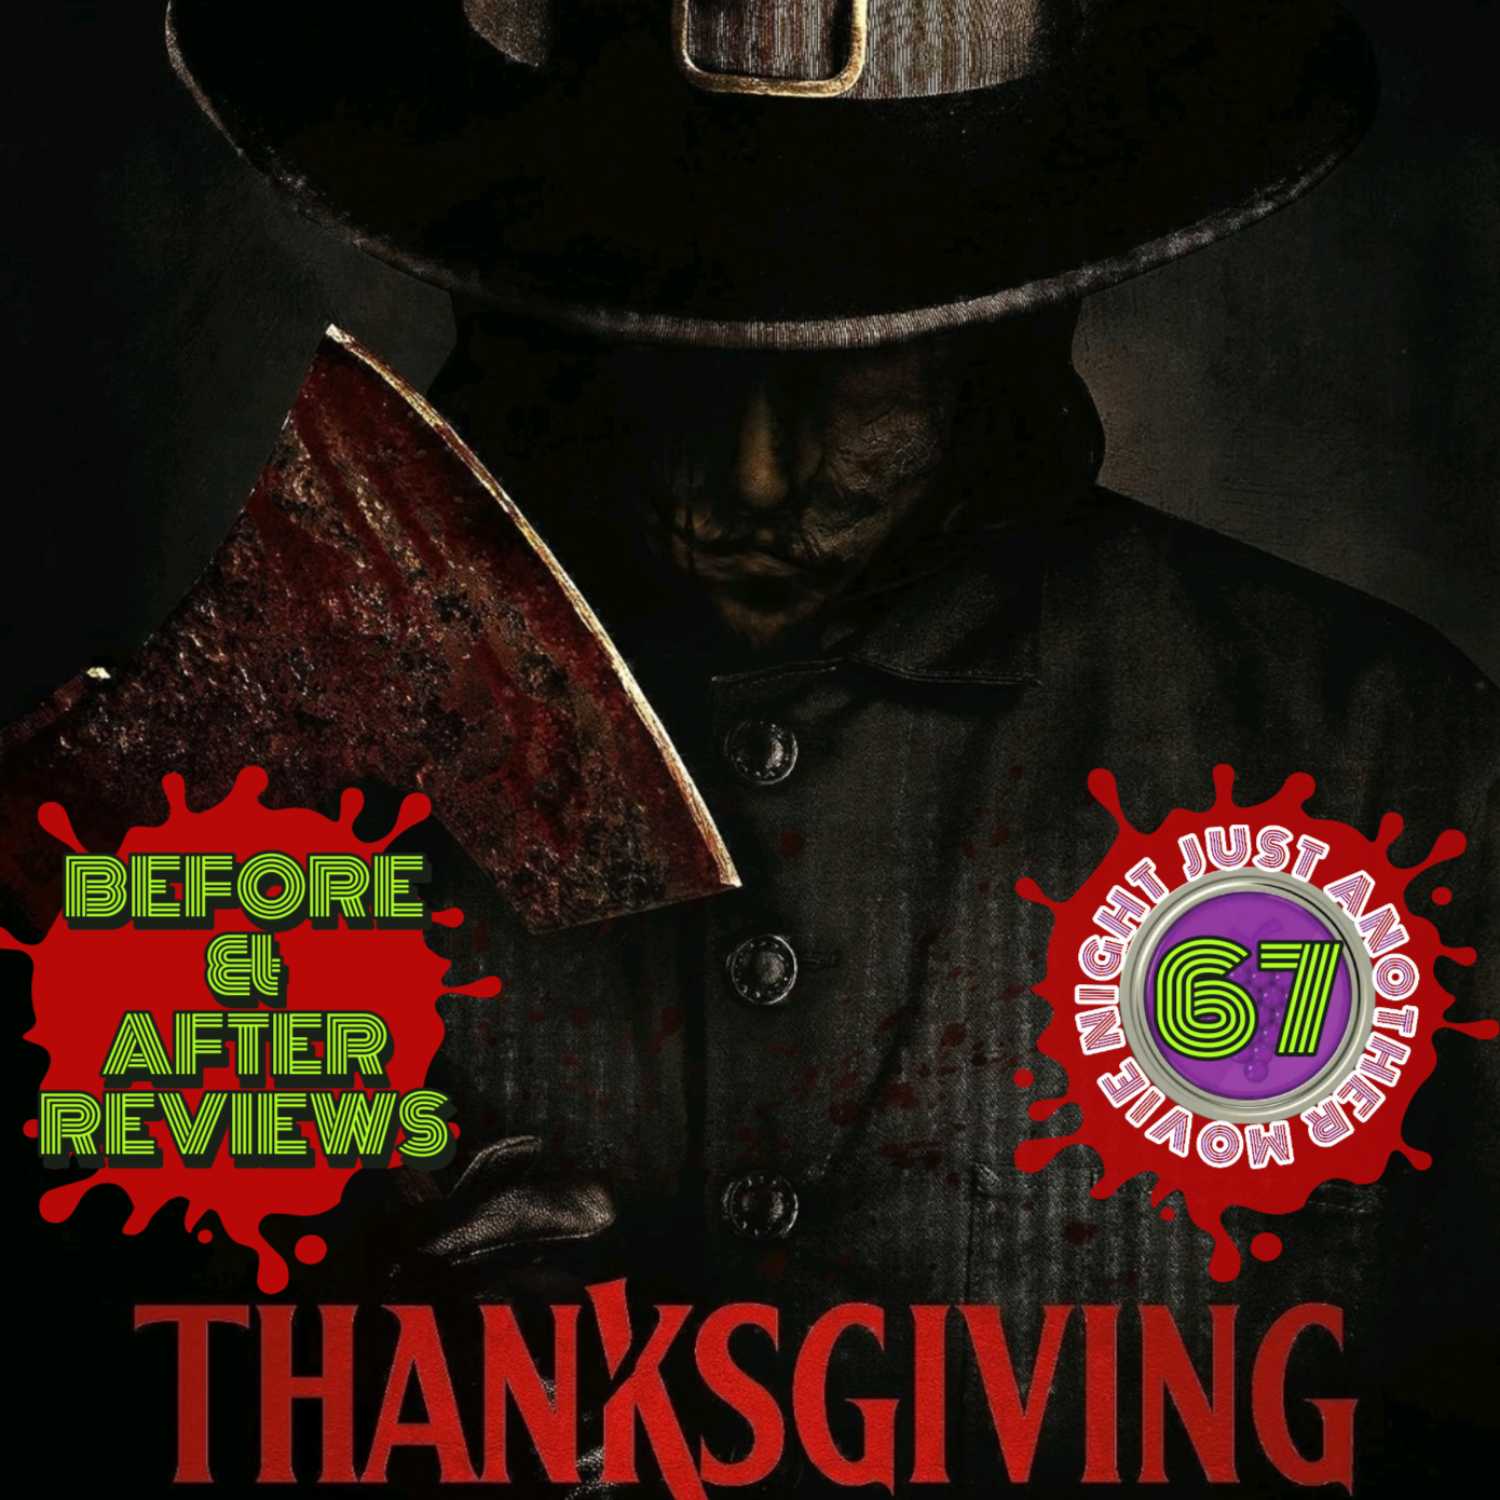 Before and After reviews Episode 67: Thanksgiving